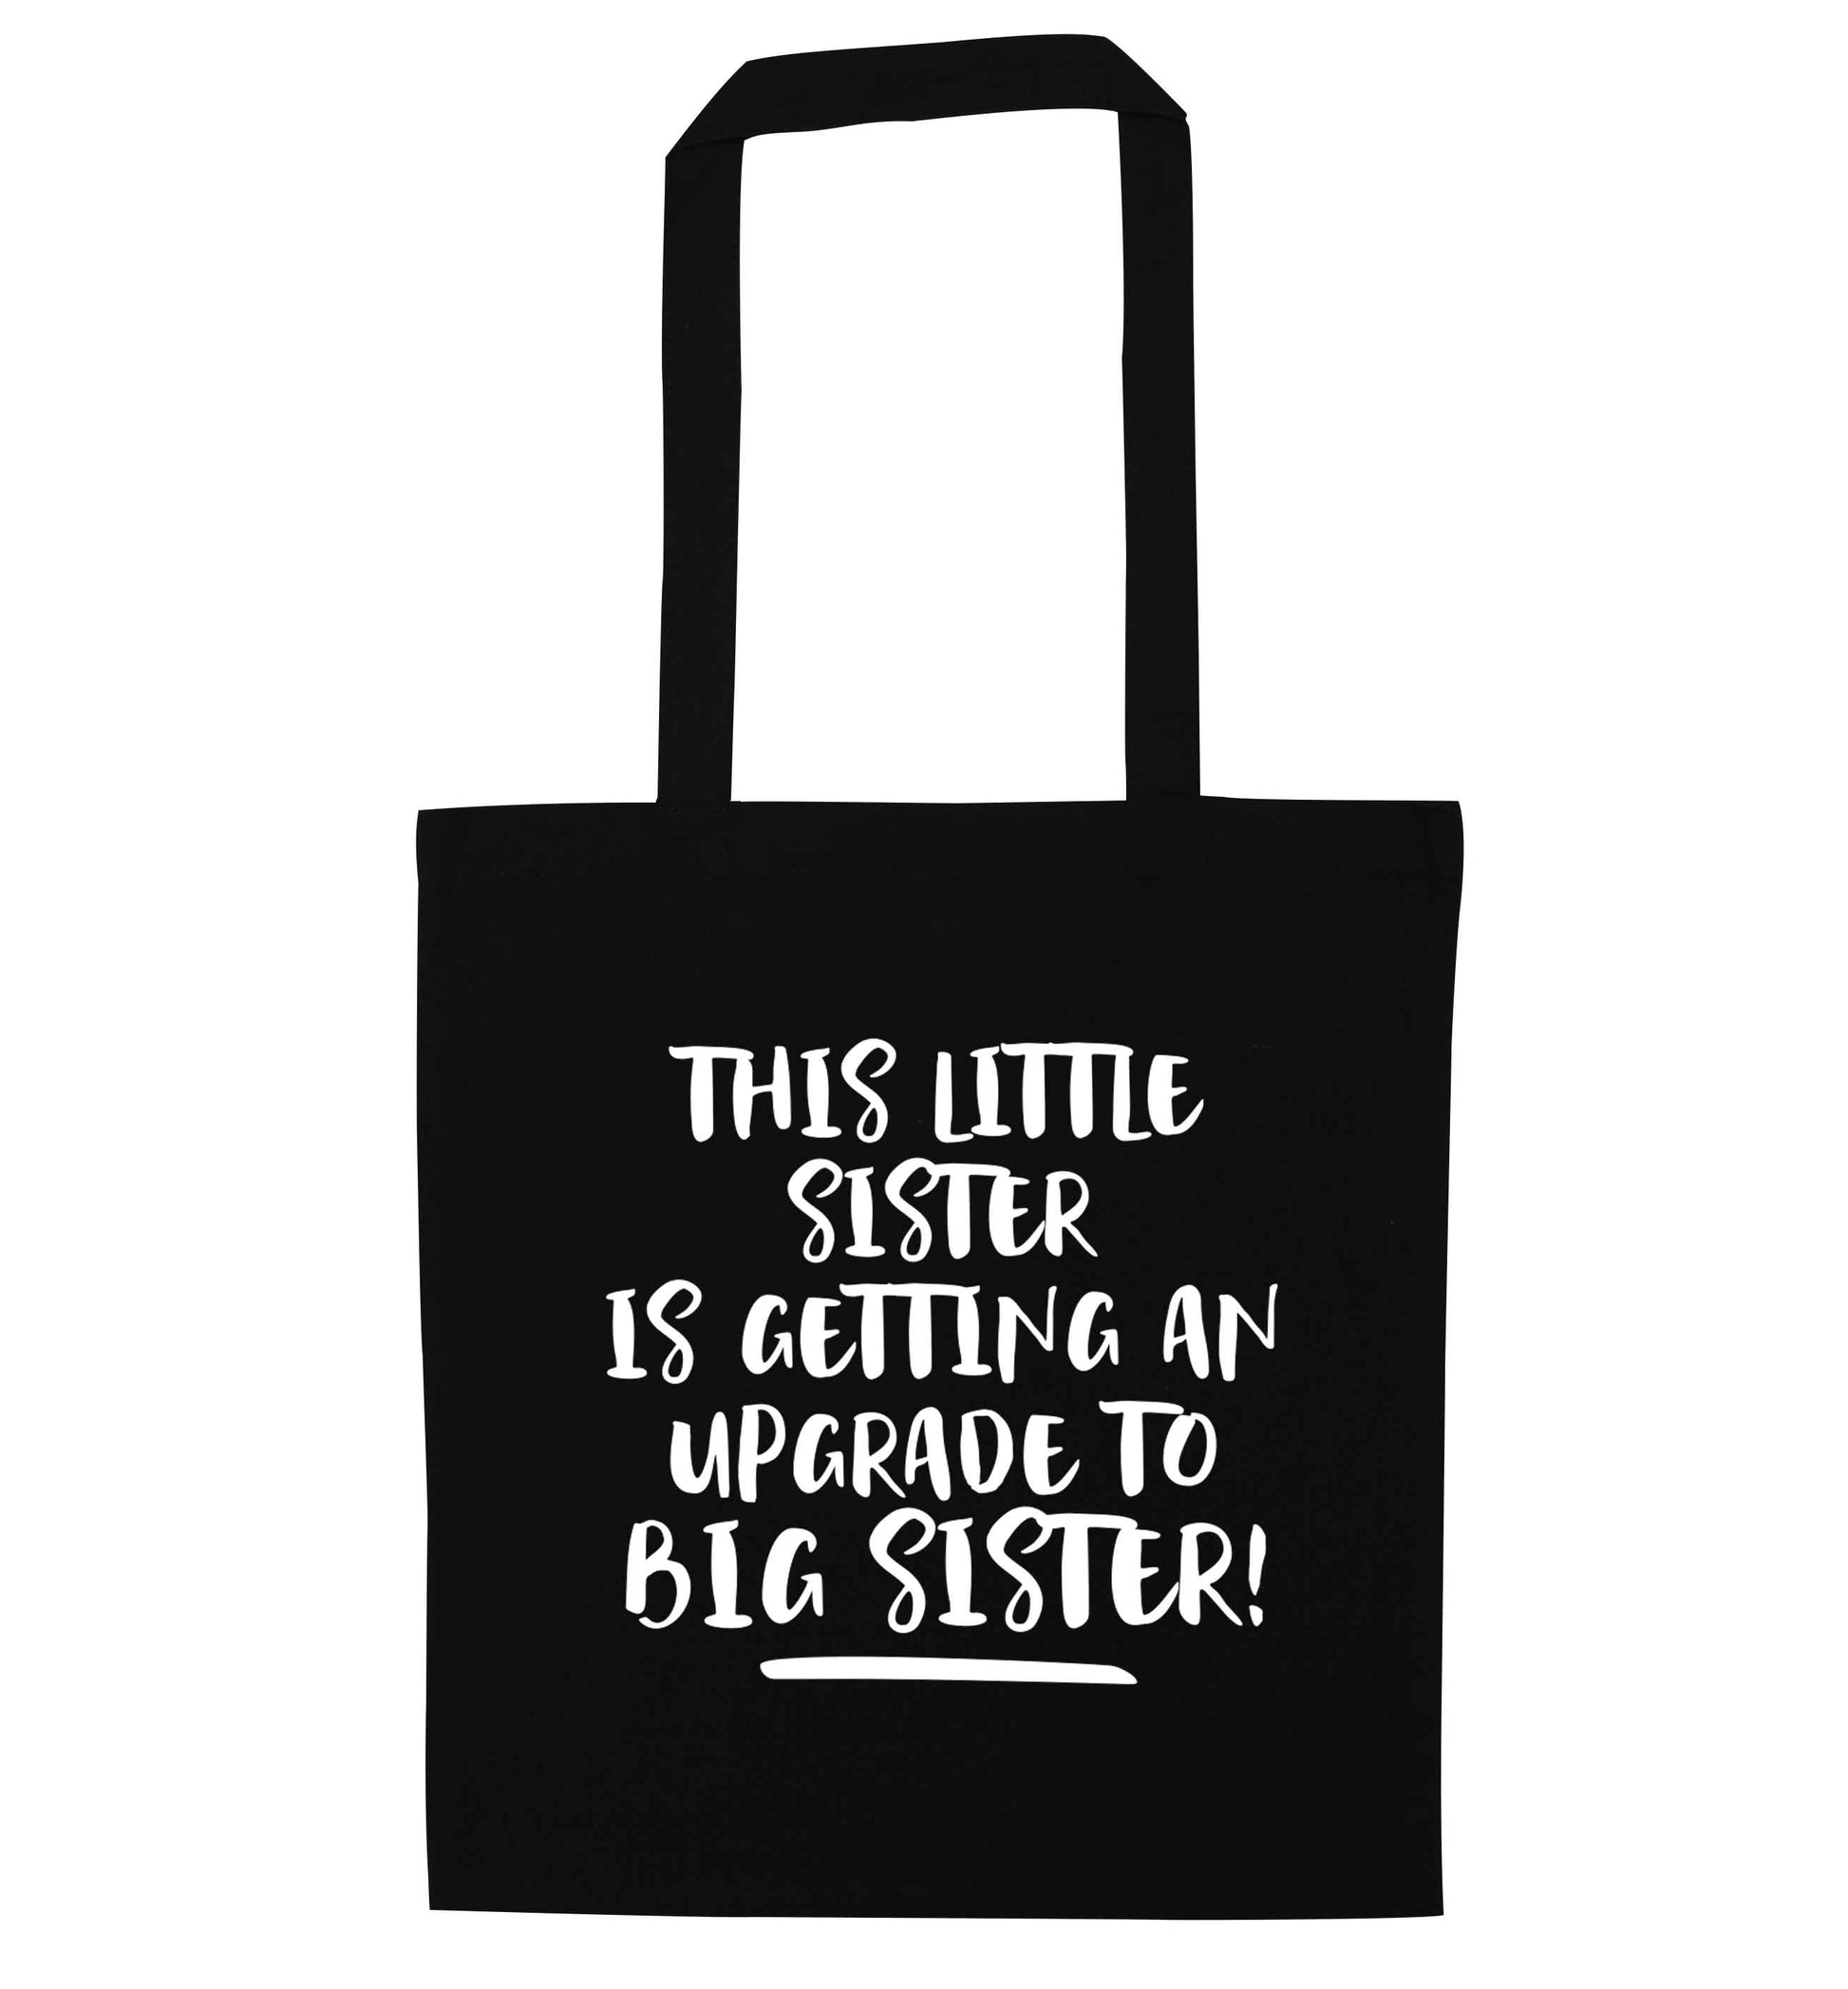 This little sister is getting an upgrade to big sister! black tote bag